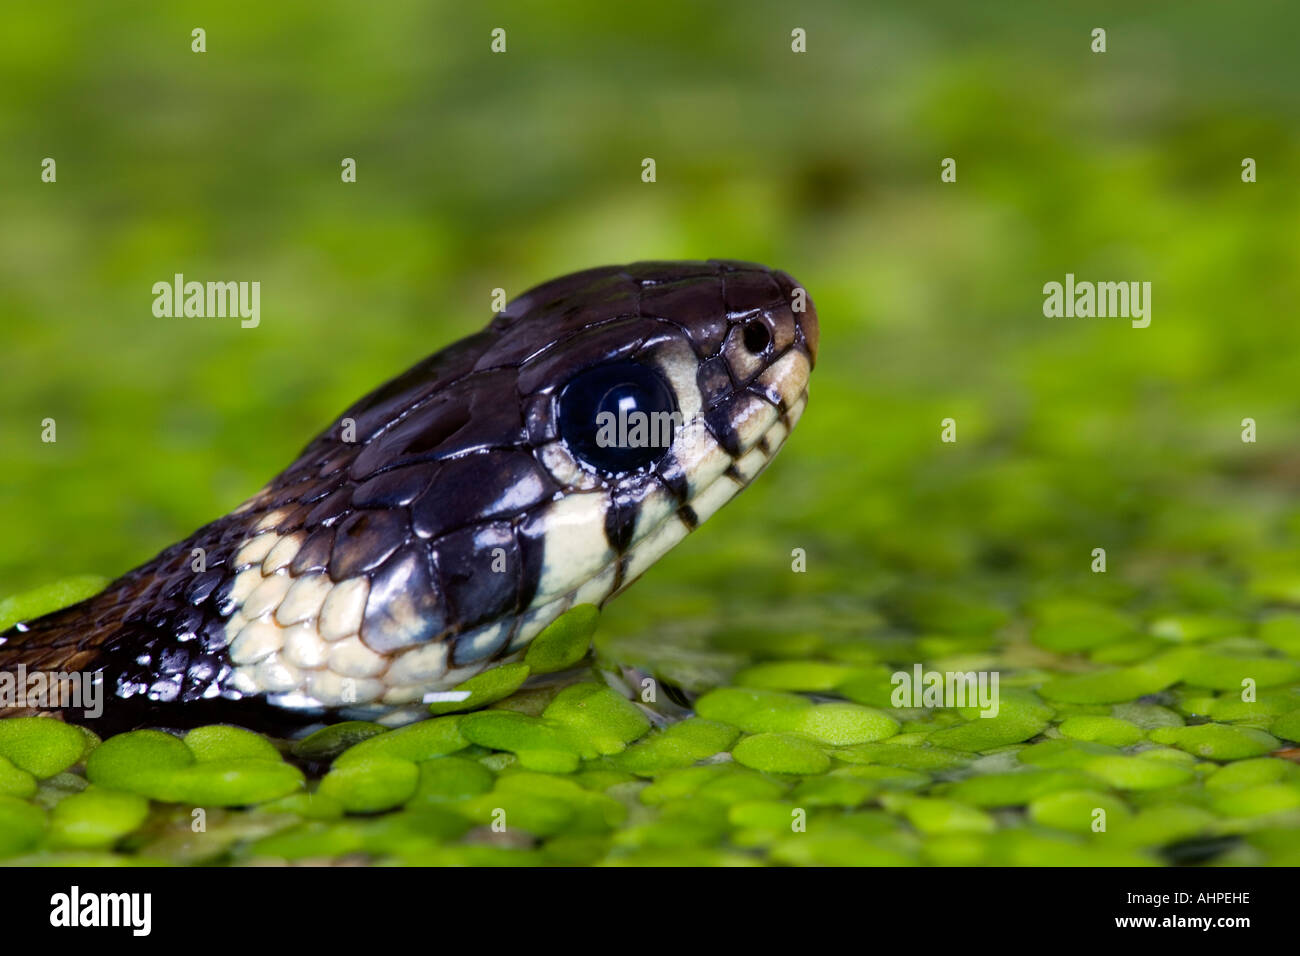 Small young Grass snake Natrix natrix swimming in garden pond close up of head Potton Bedfordshire Stock Photo